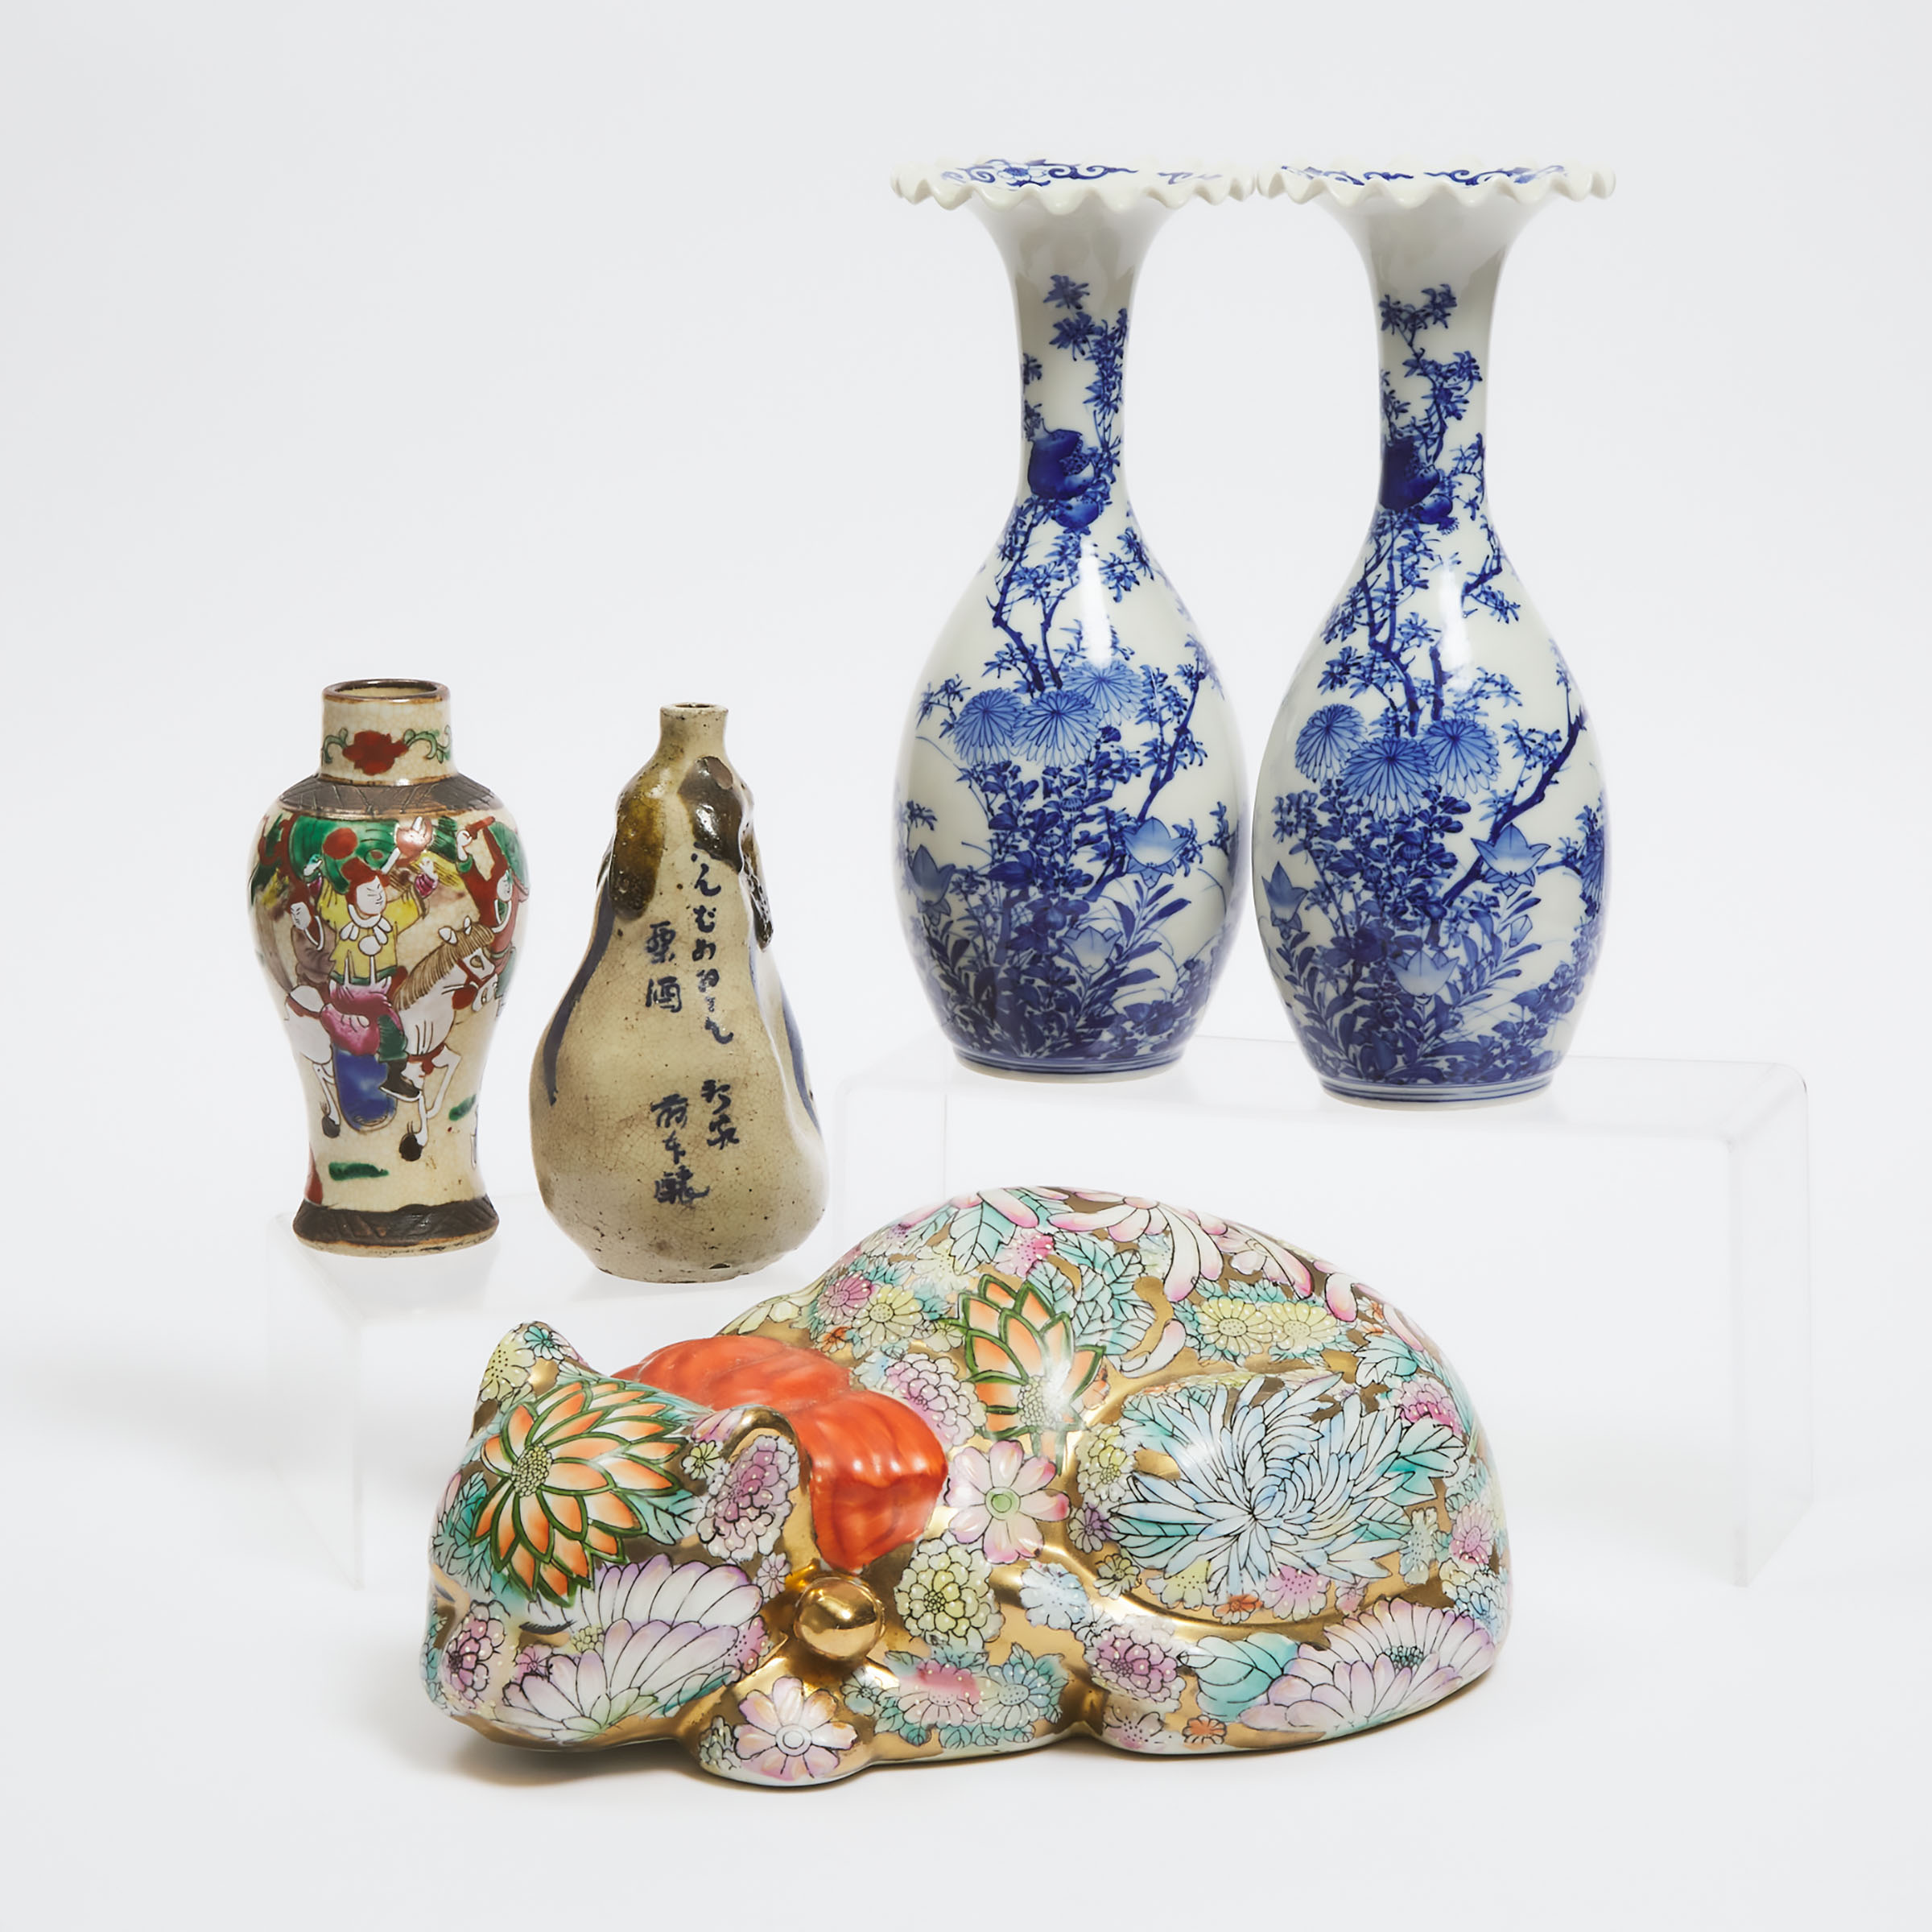 A Group of Five Ceramic Wares, 20th Century